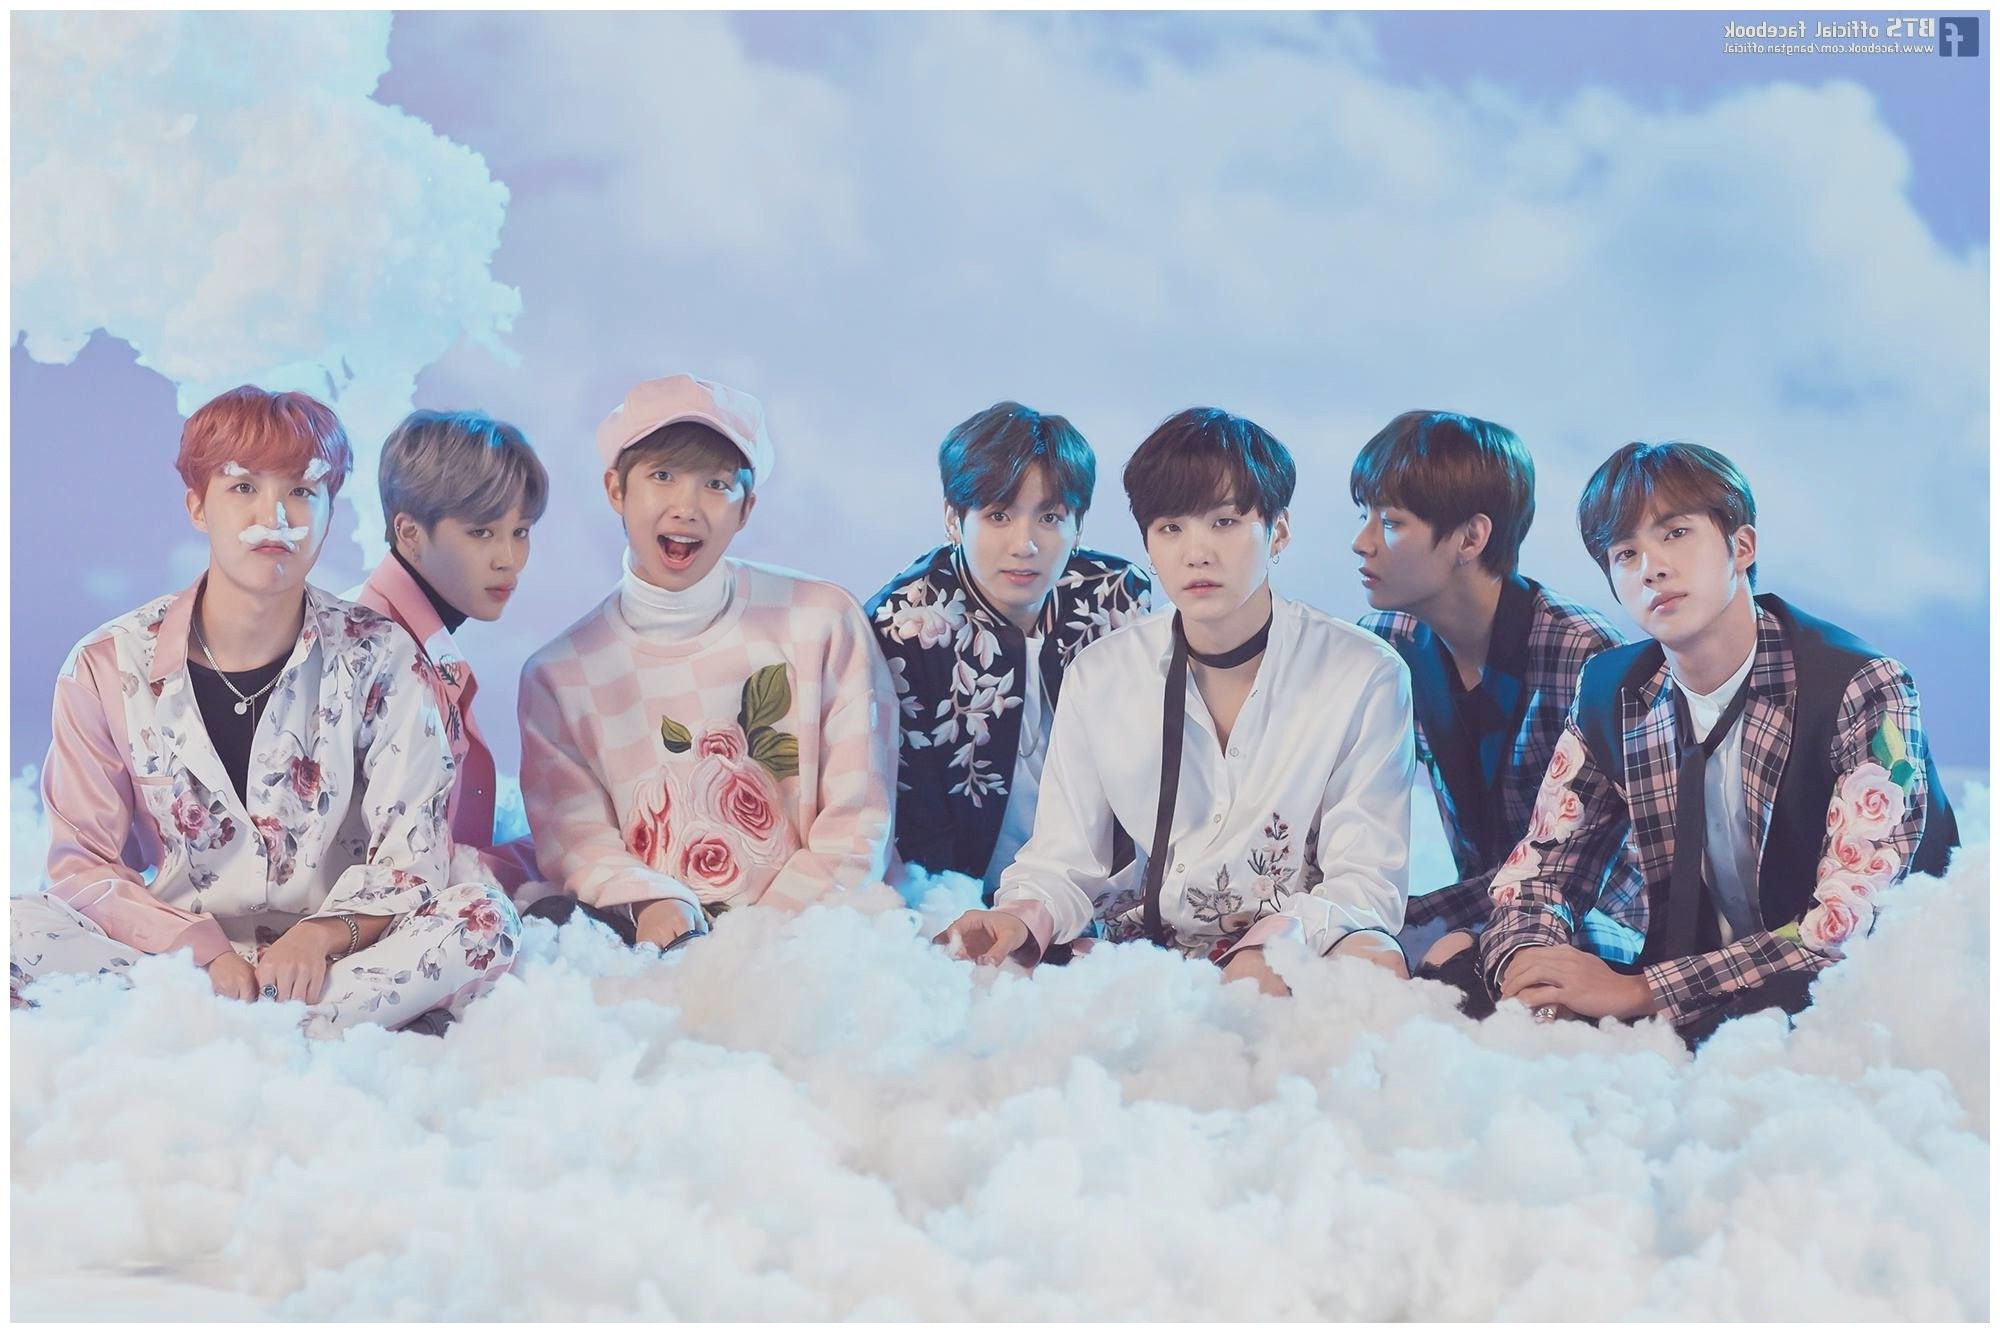 The group of BTS members sitting on a pile of clouds - BTS